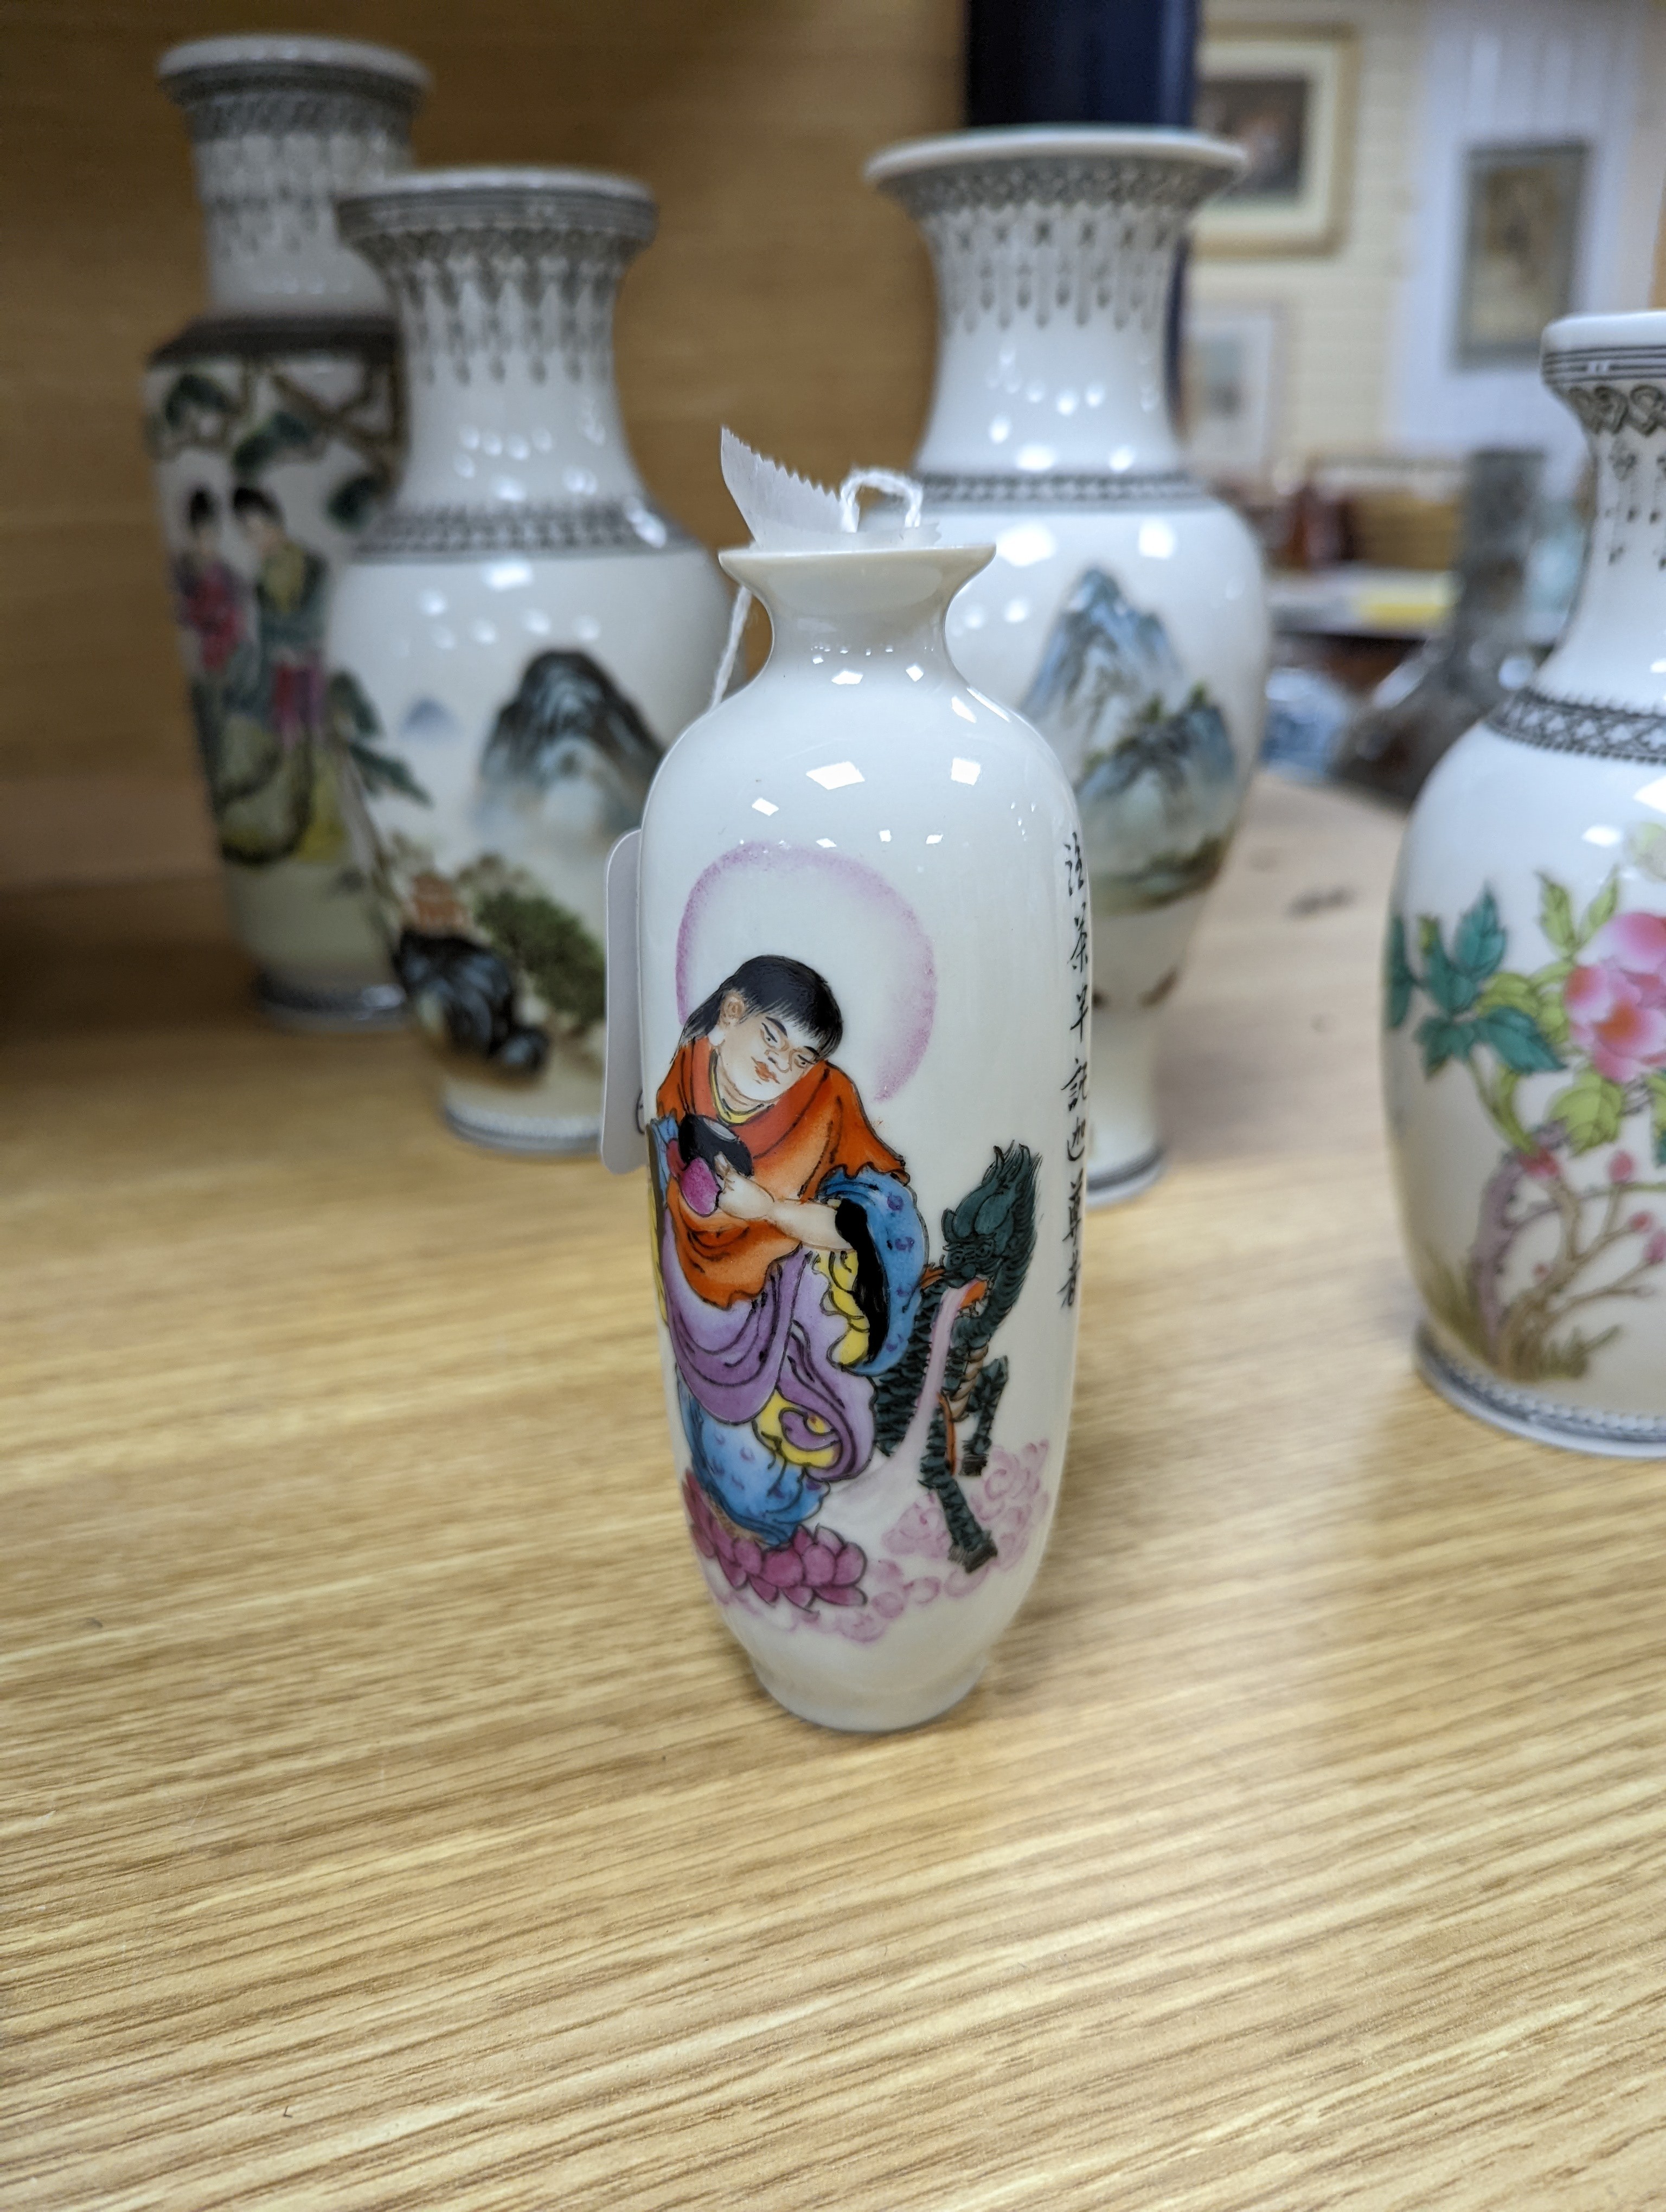 A group of seven Chinese famille rose vases, 20th century